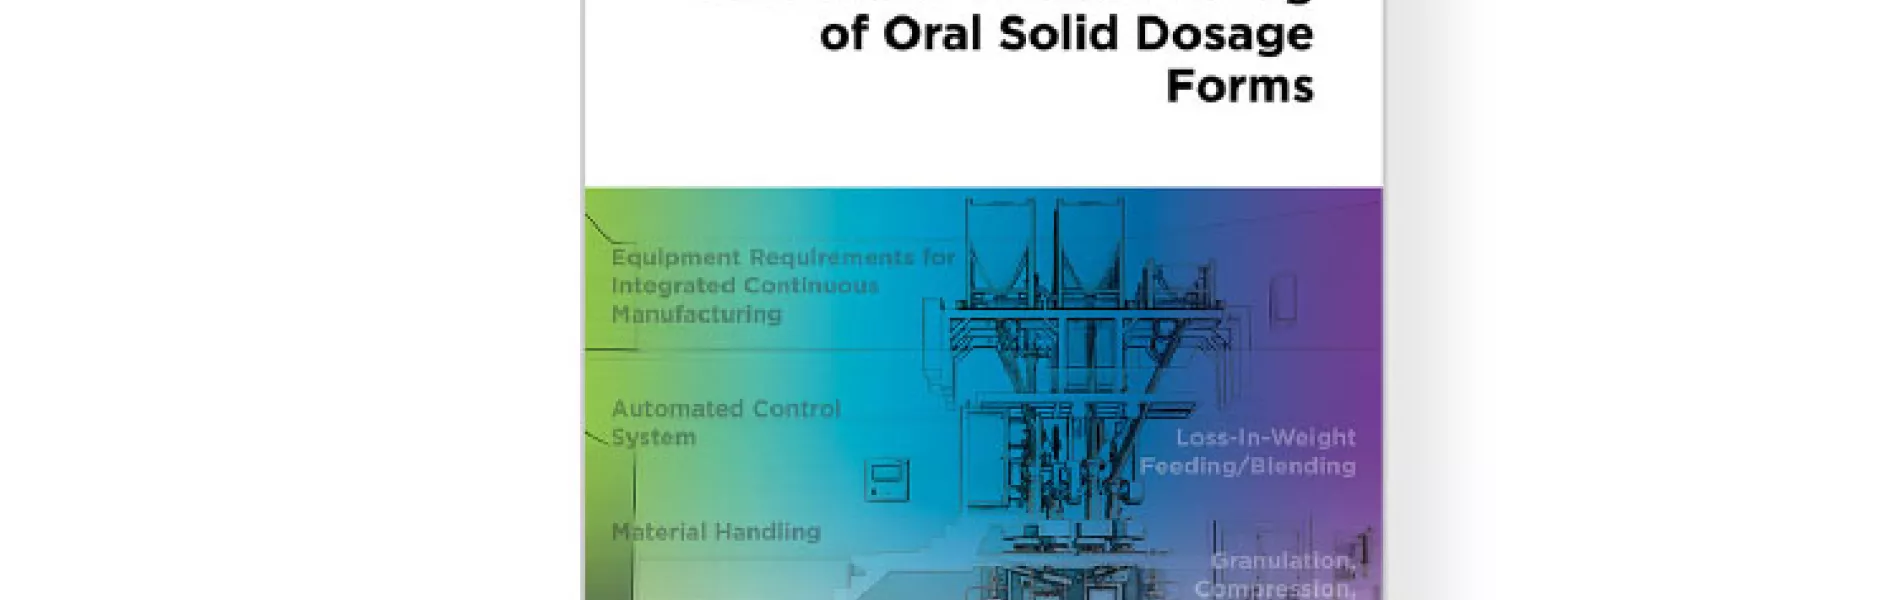 A Comprehensive Reference for Continuous Manufacturing of OSD